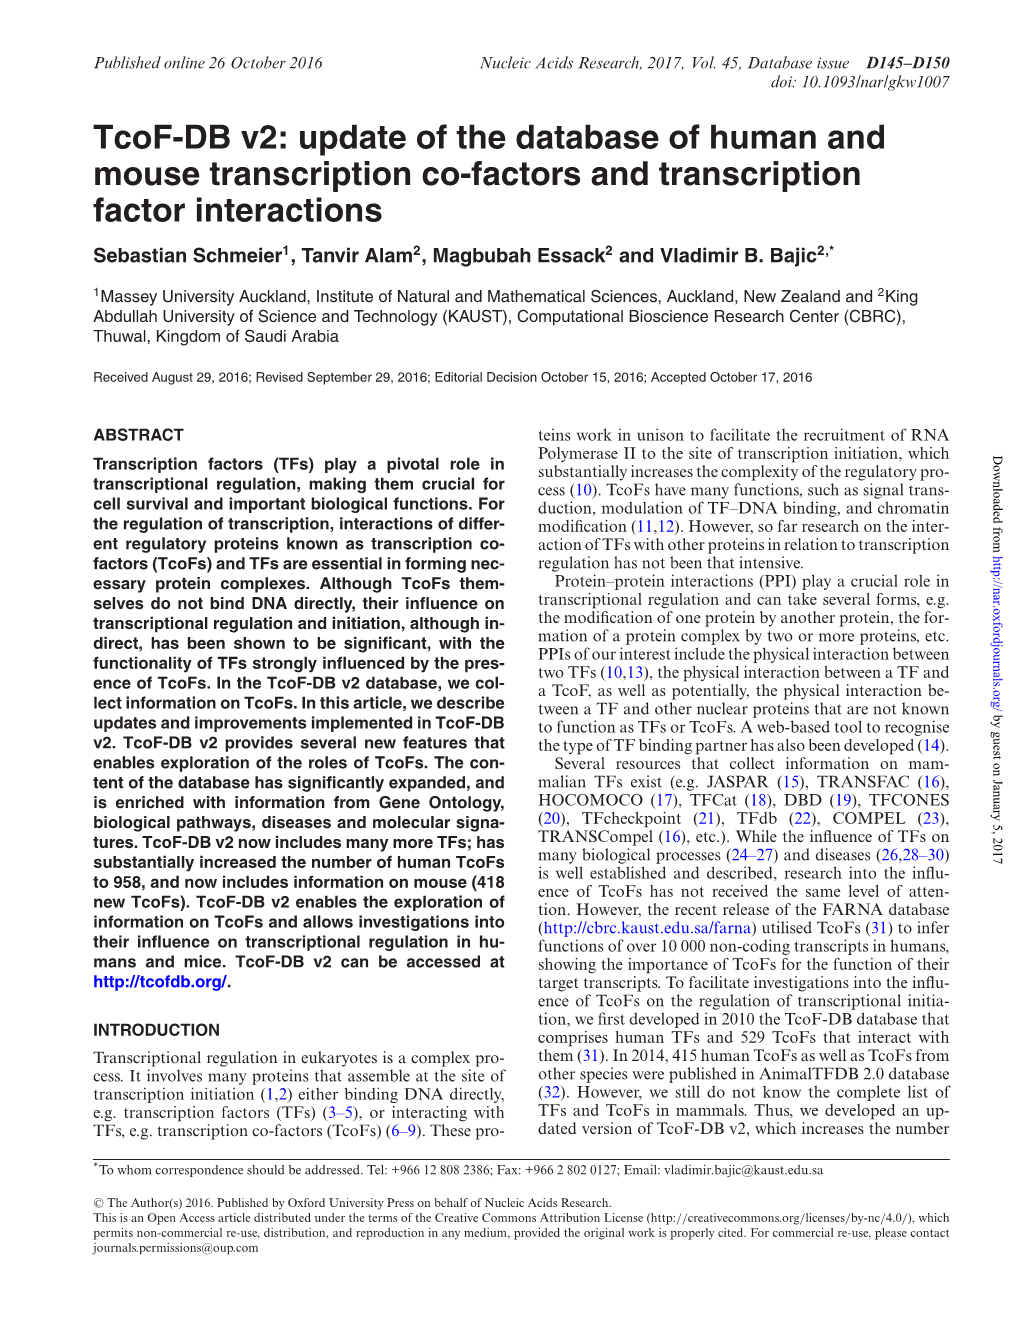 Tcof-DB V2: Update of the Database of Human and Mouse Transcription Co